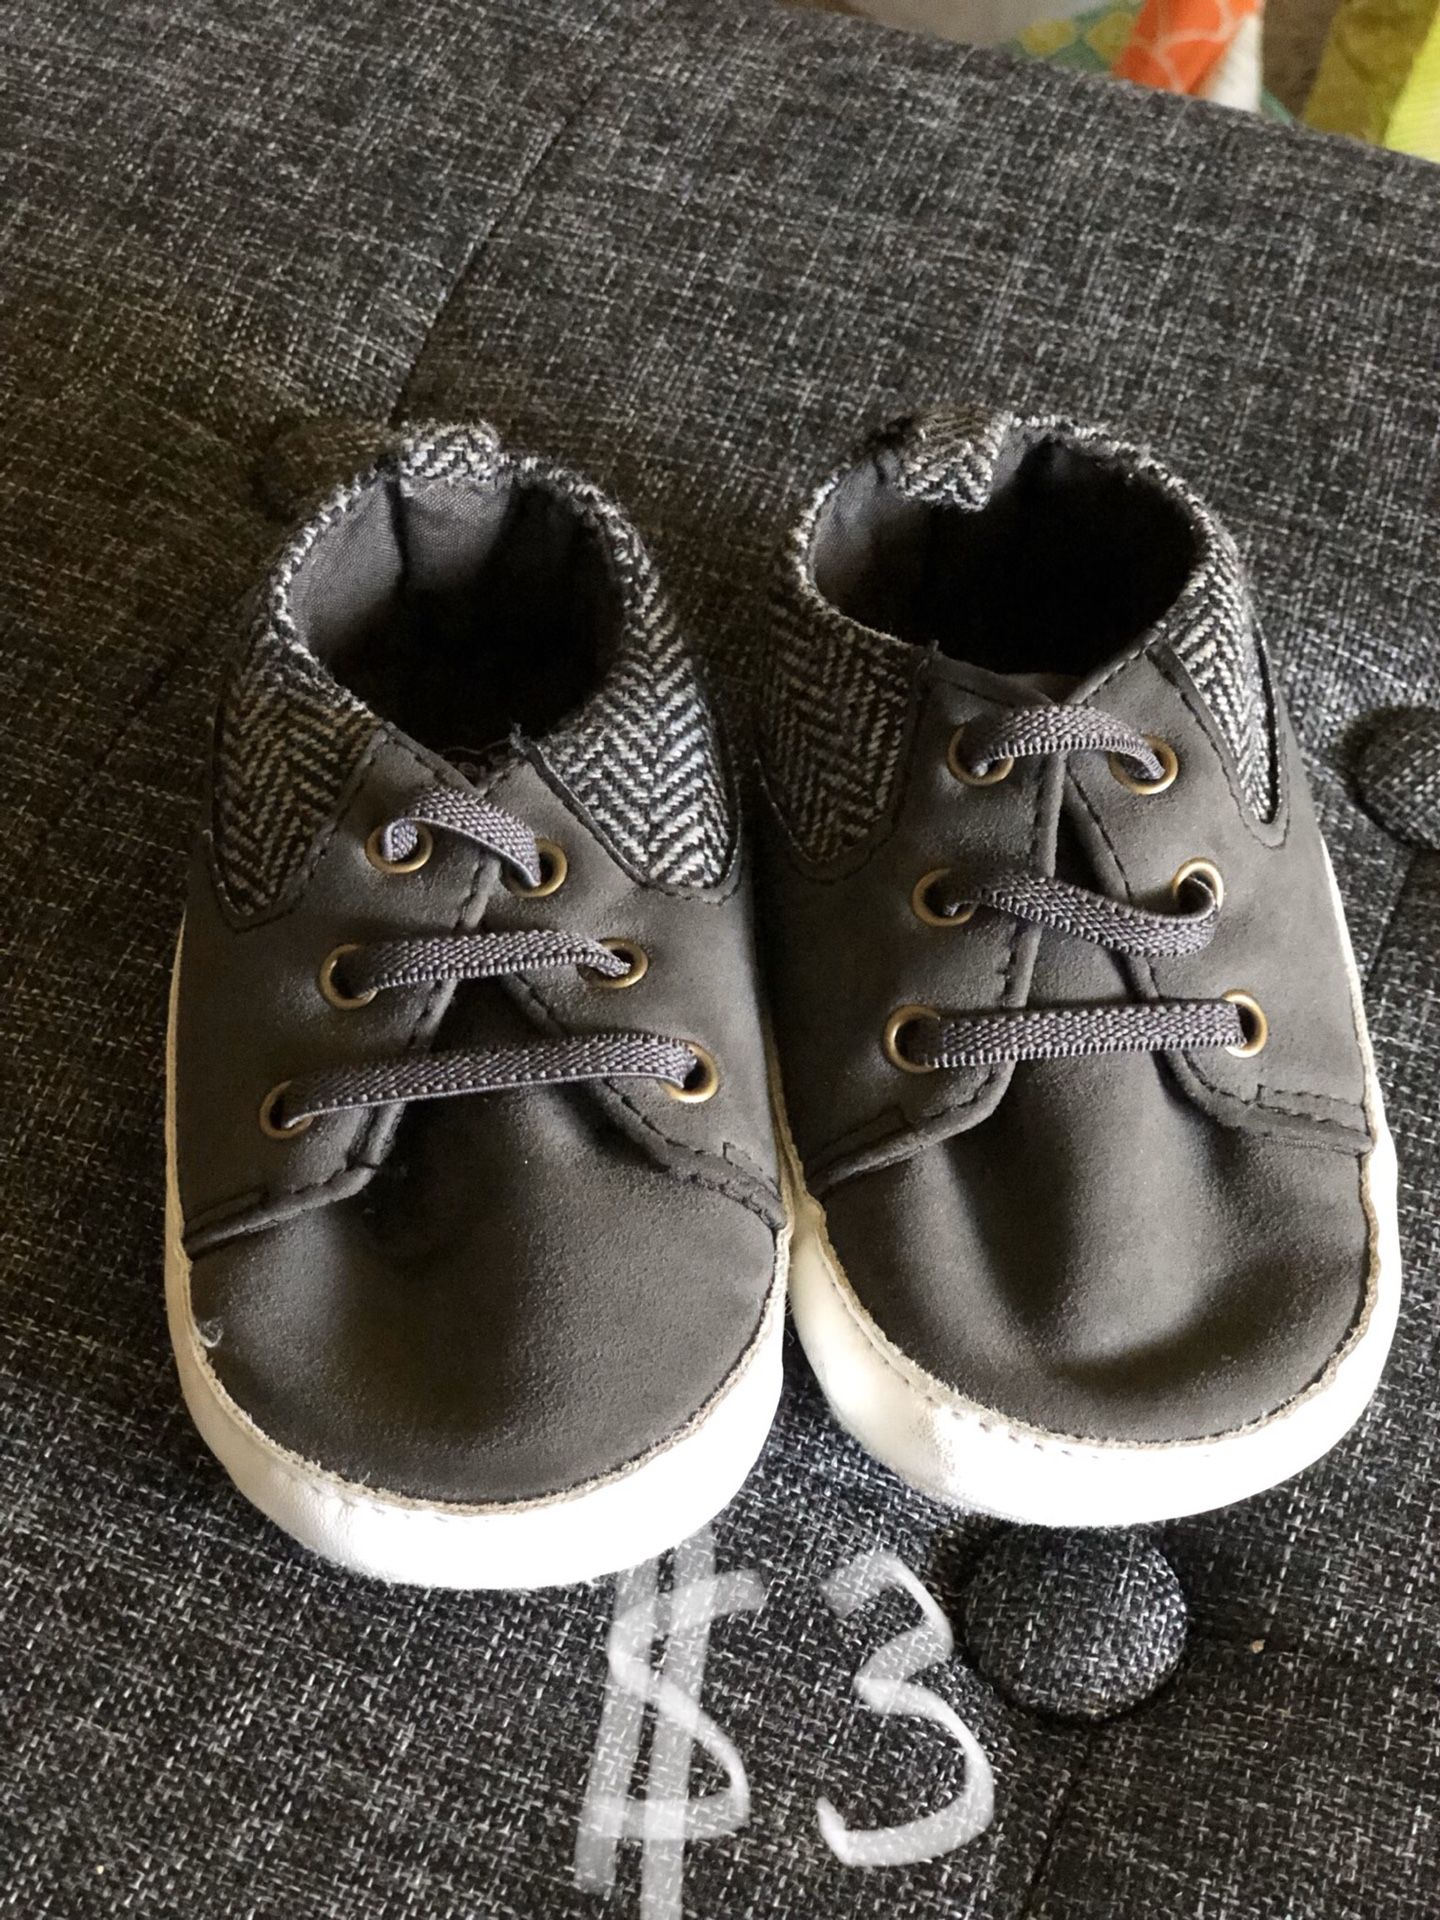 Baby toddler shoes size 4. 12 to 18 months crib shoes